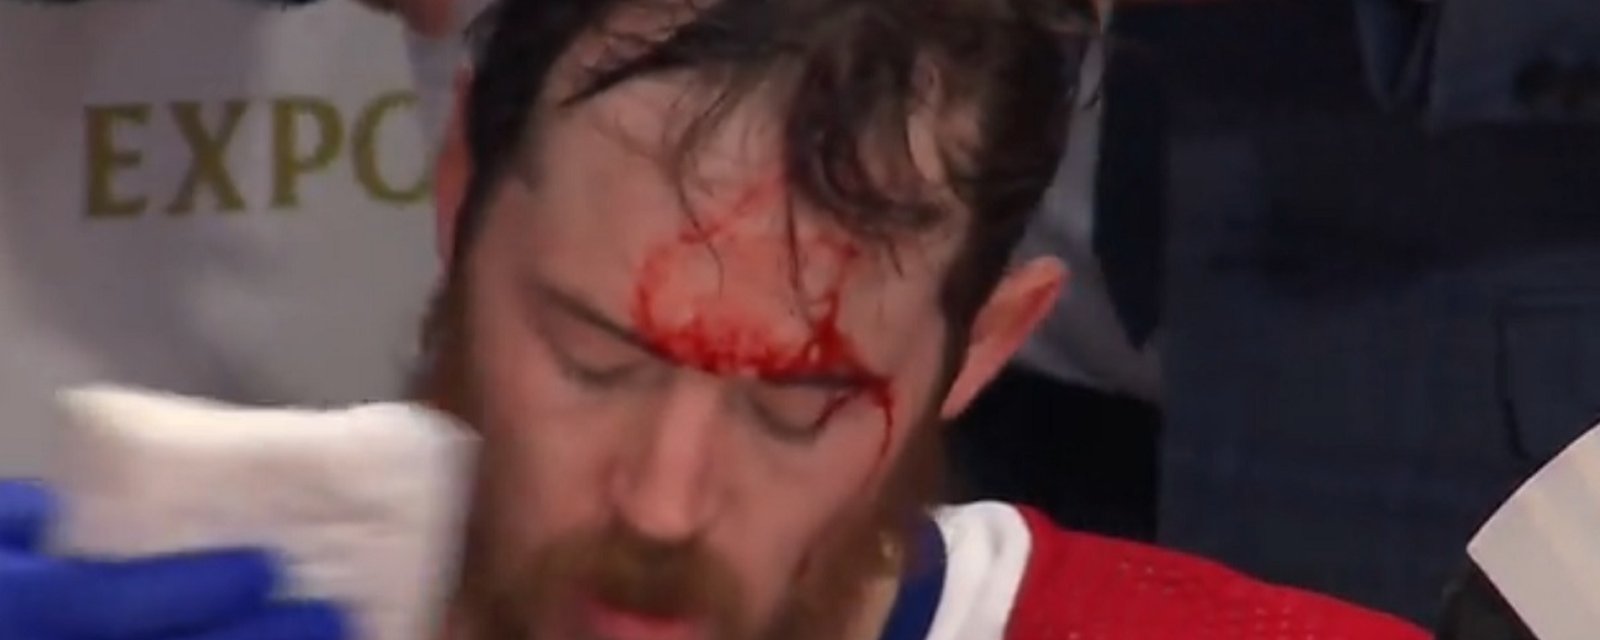 Paul Byron busted open after losing his helmet.